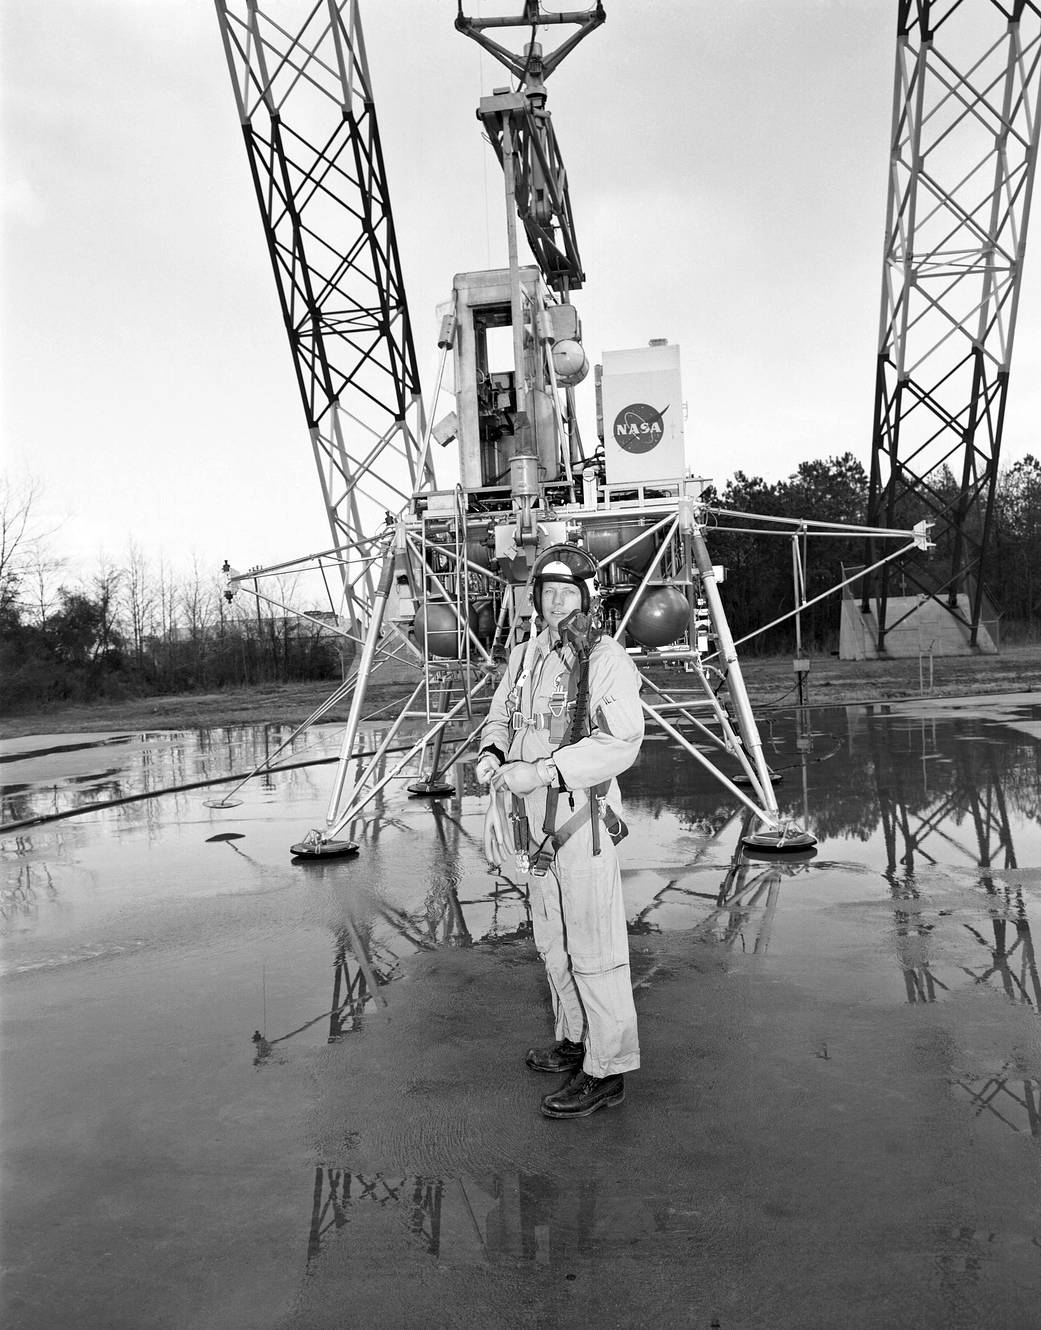 The Road to Apollo - Neil Armstrong at the Lunar Landing Research Facility